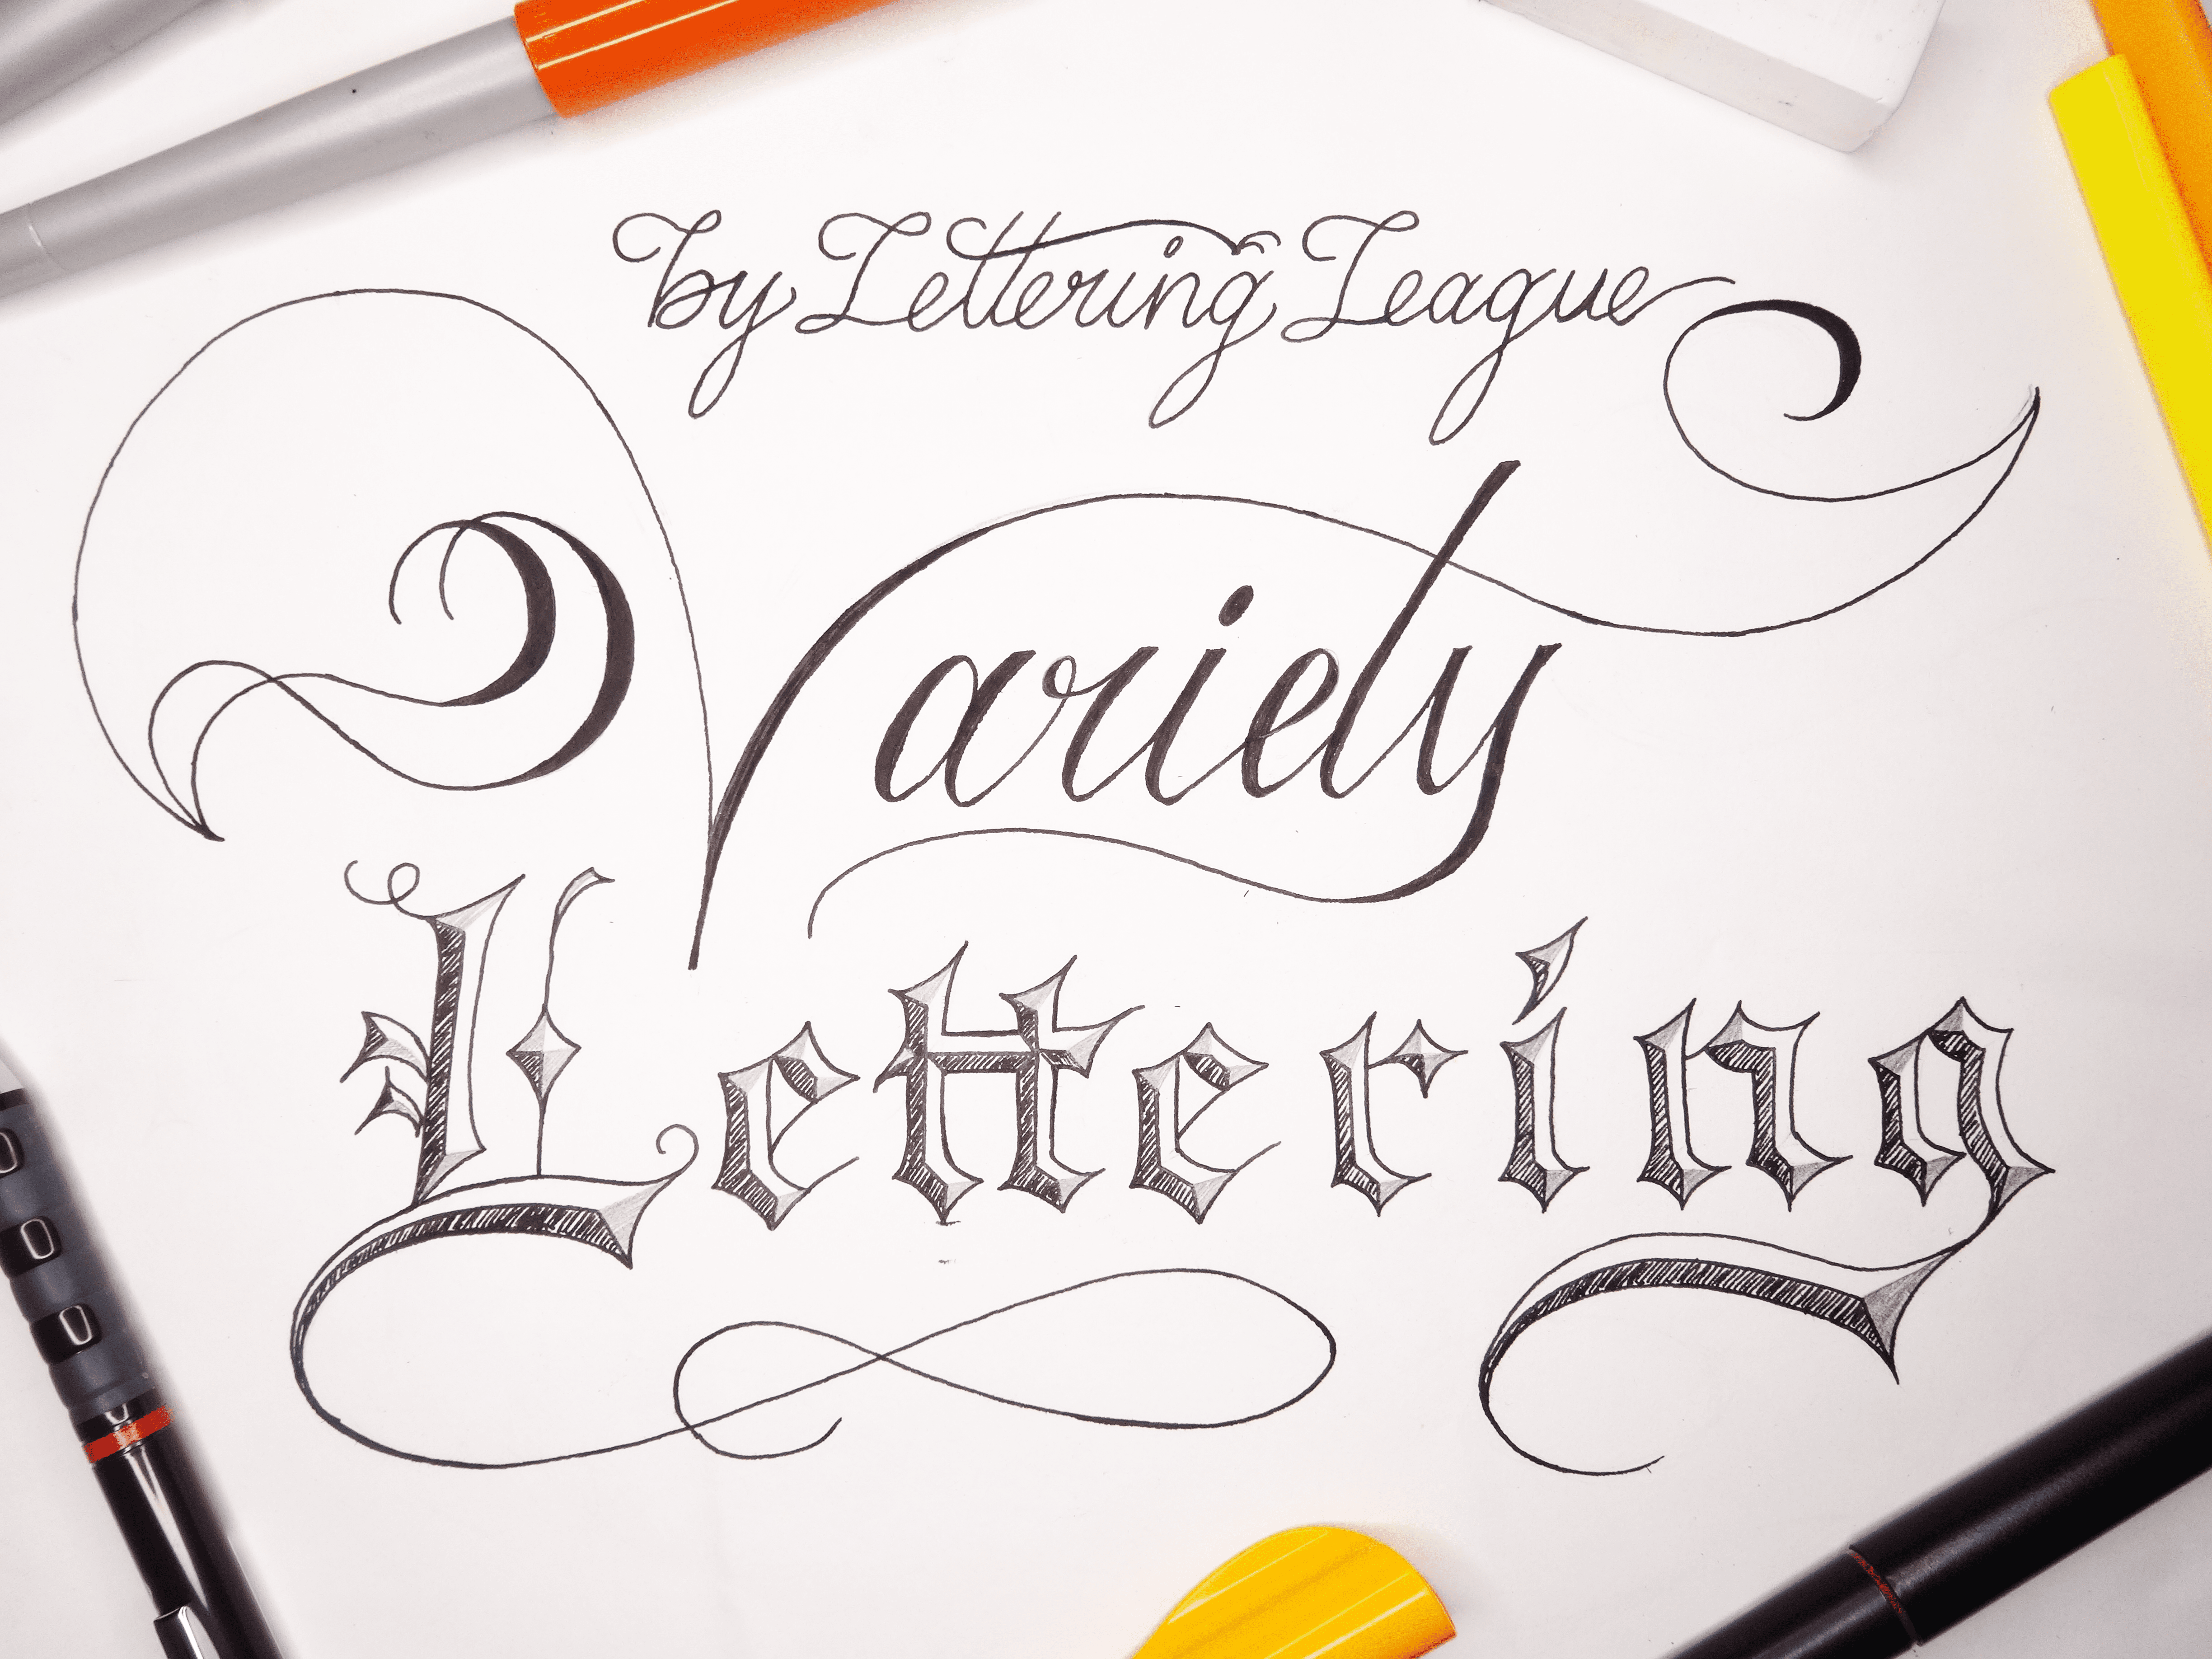 Different Lettering Types: Styles of Lettering - Lettering League